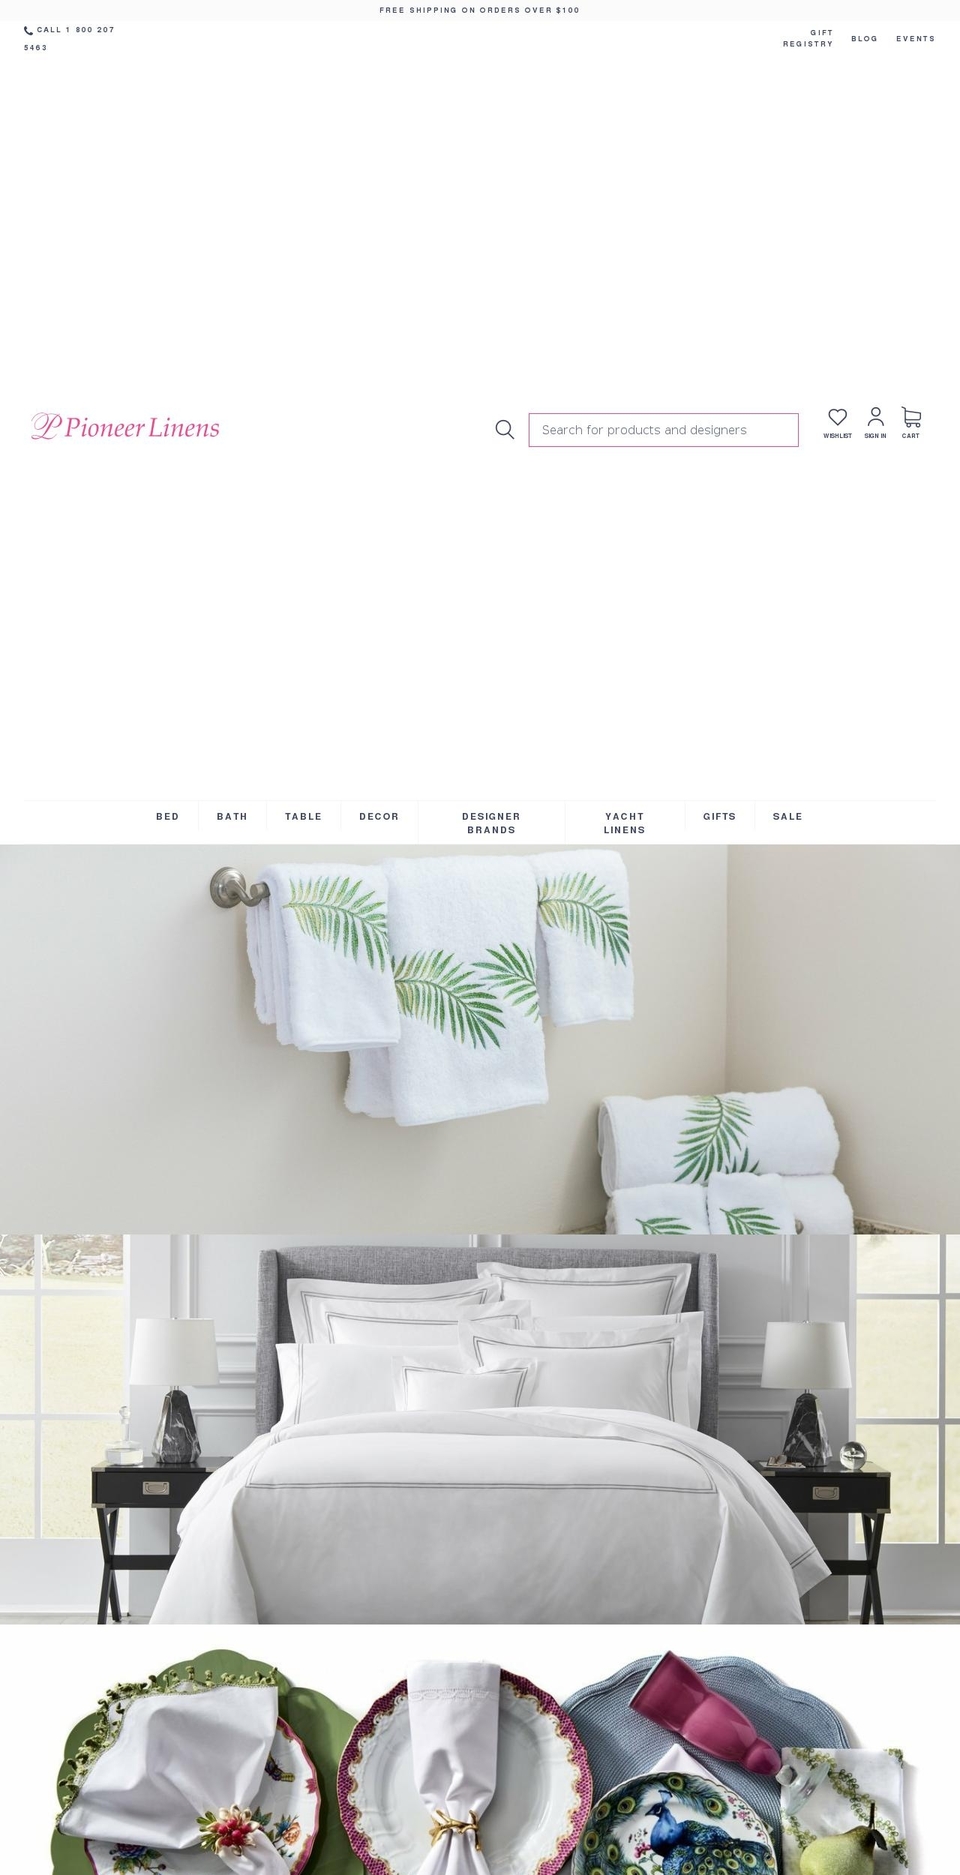 Buko Shopify Theme - Products Consolidation Shopify theme site example customfittedsheets.com